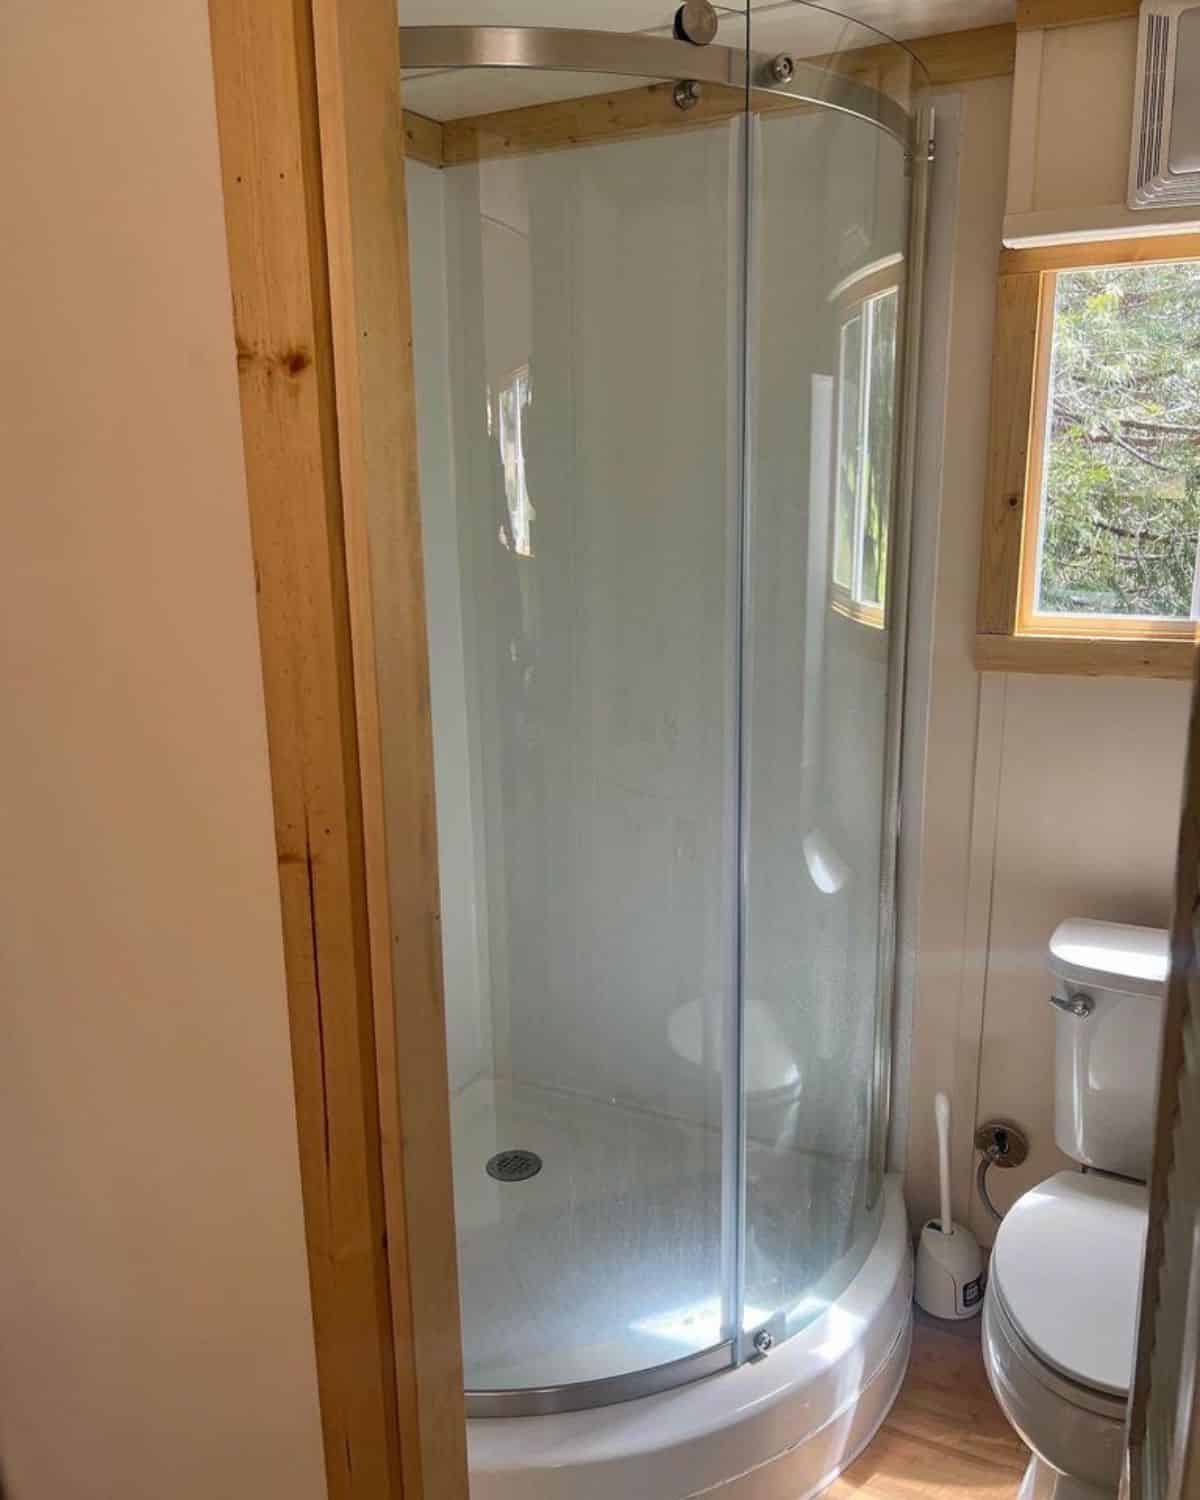 full length shower area with glass enclosure in bathroom of 30’ budget dwelling